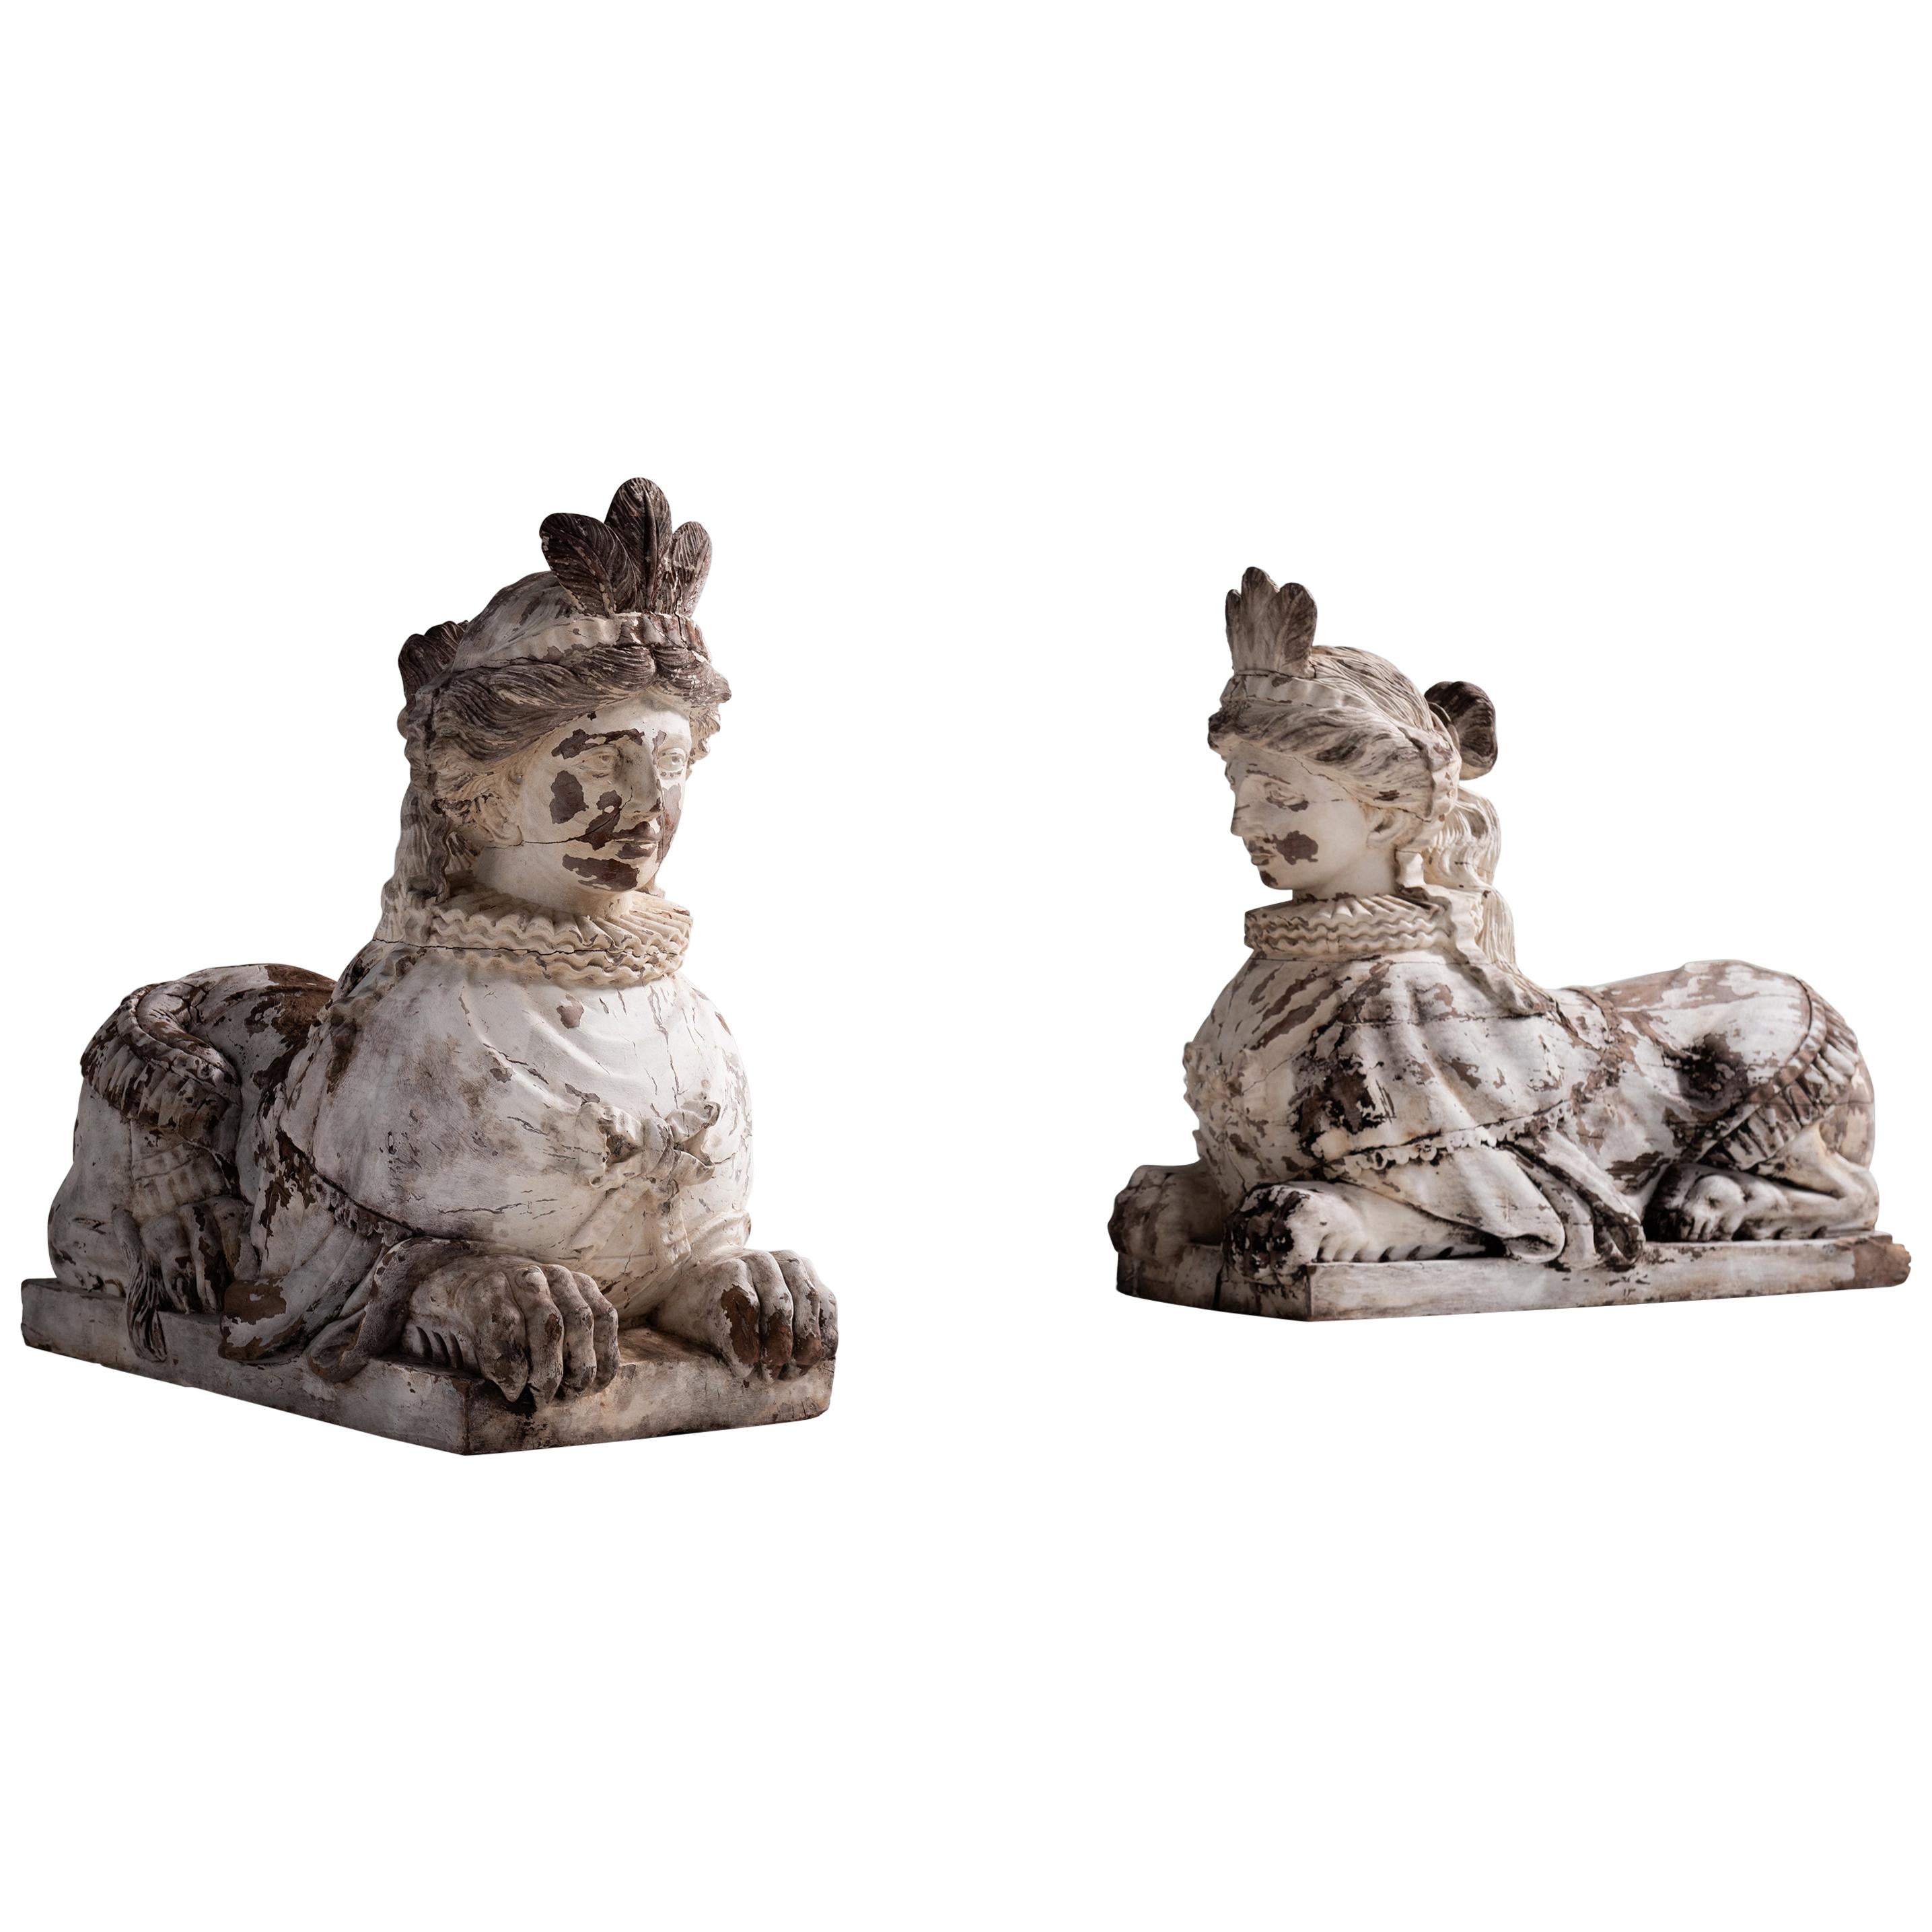 Monumental Solid Wood Carved Sphinxes, England, circa 1860